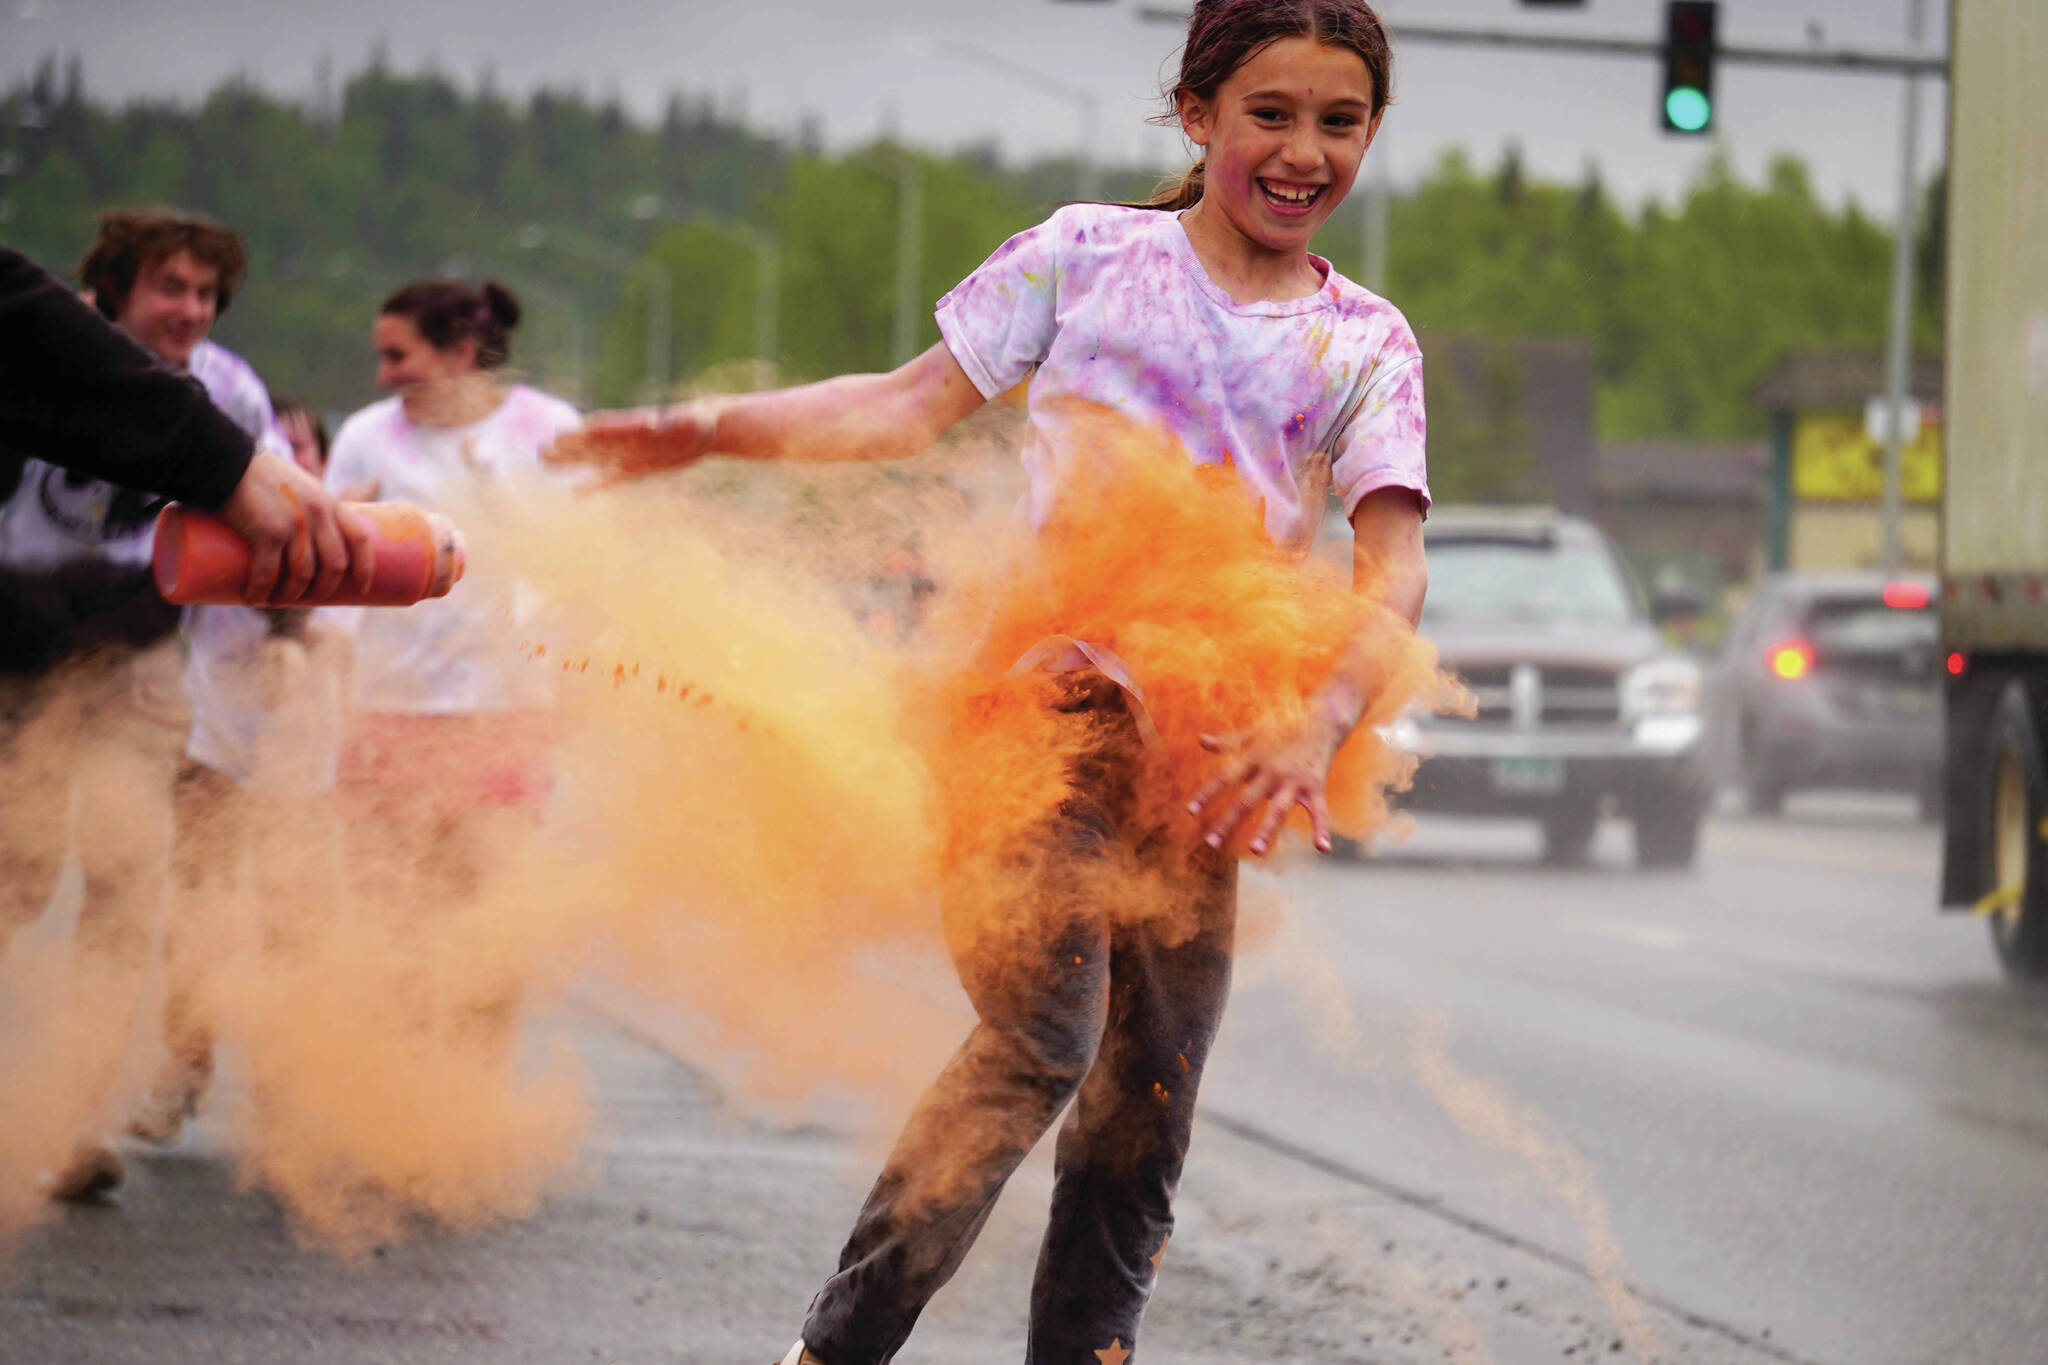 Jake Dye/Peninsula Clarion
Emily Musgrove emerges from a cloud of orange powder during a color run as part of the opening night of the Levitt AMP Soldotna Music Series along the Sterling Highway in Soldotna on Wednesday.